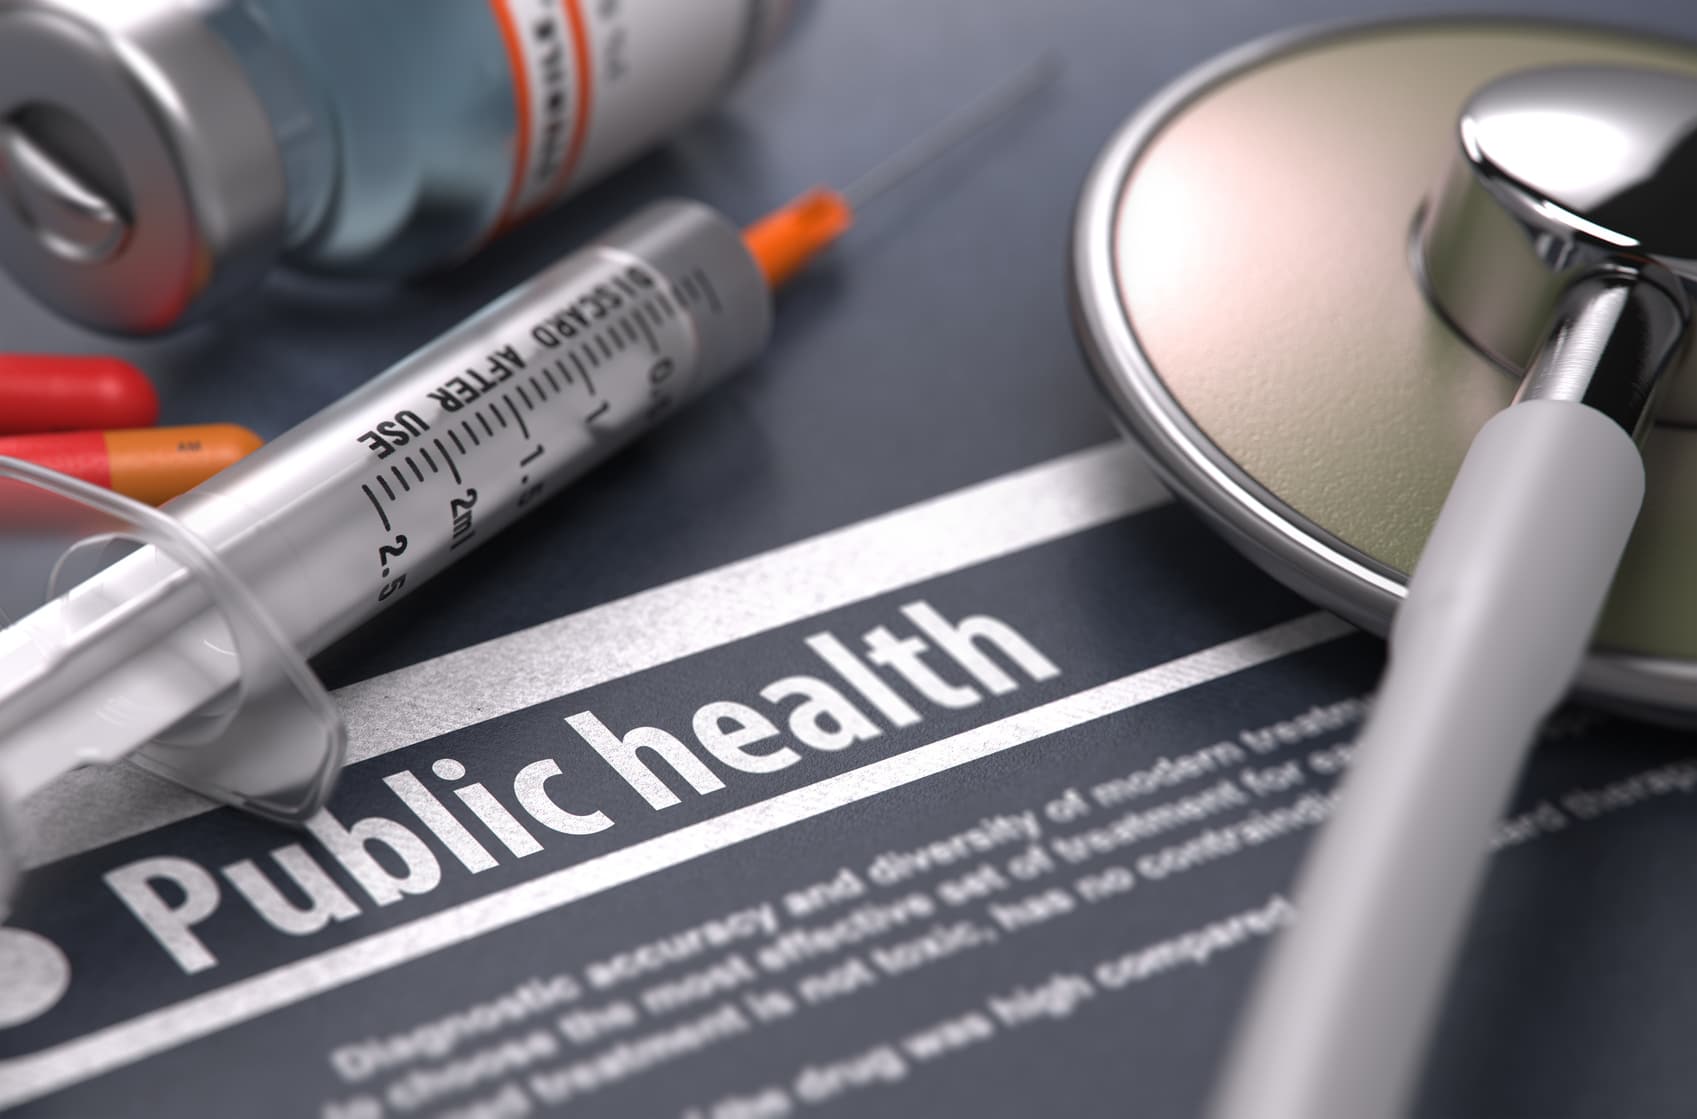 Give Thanks to Public Health Professionals